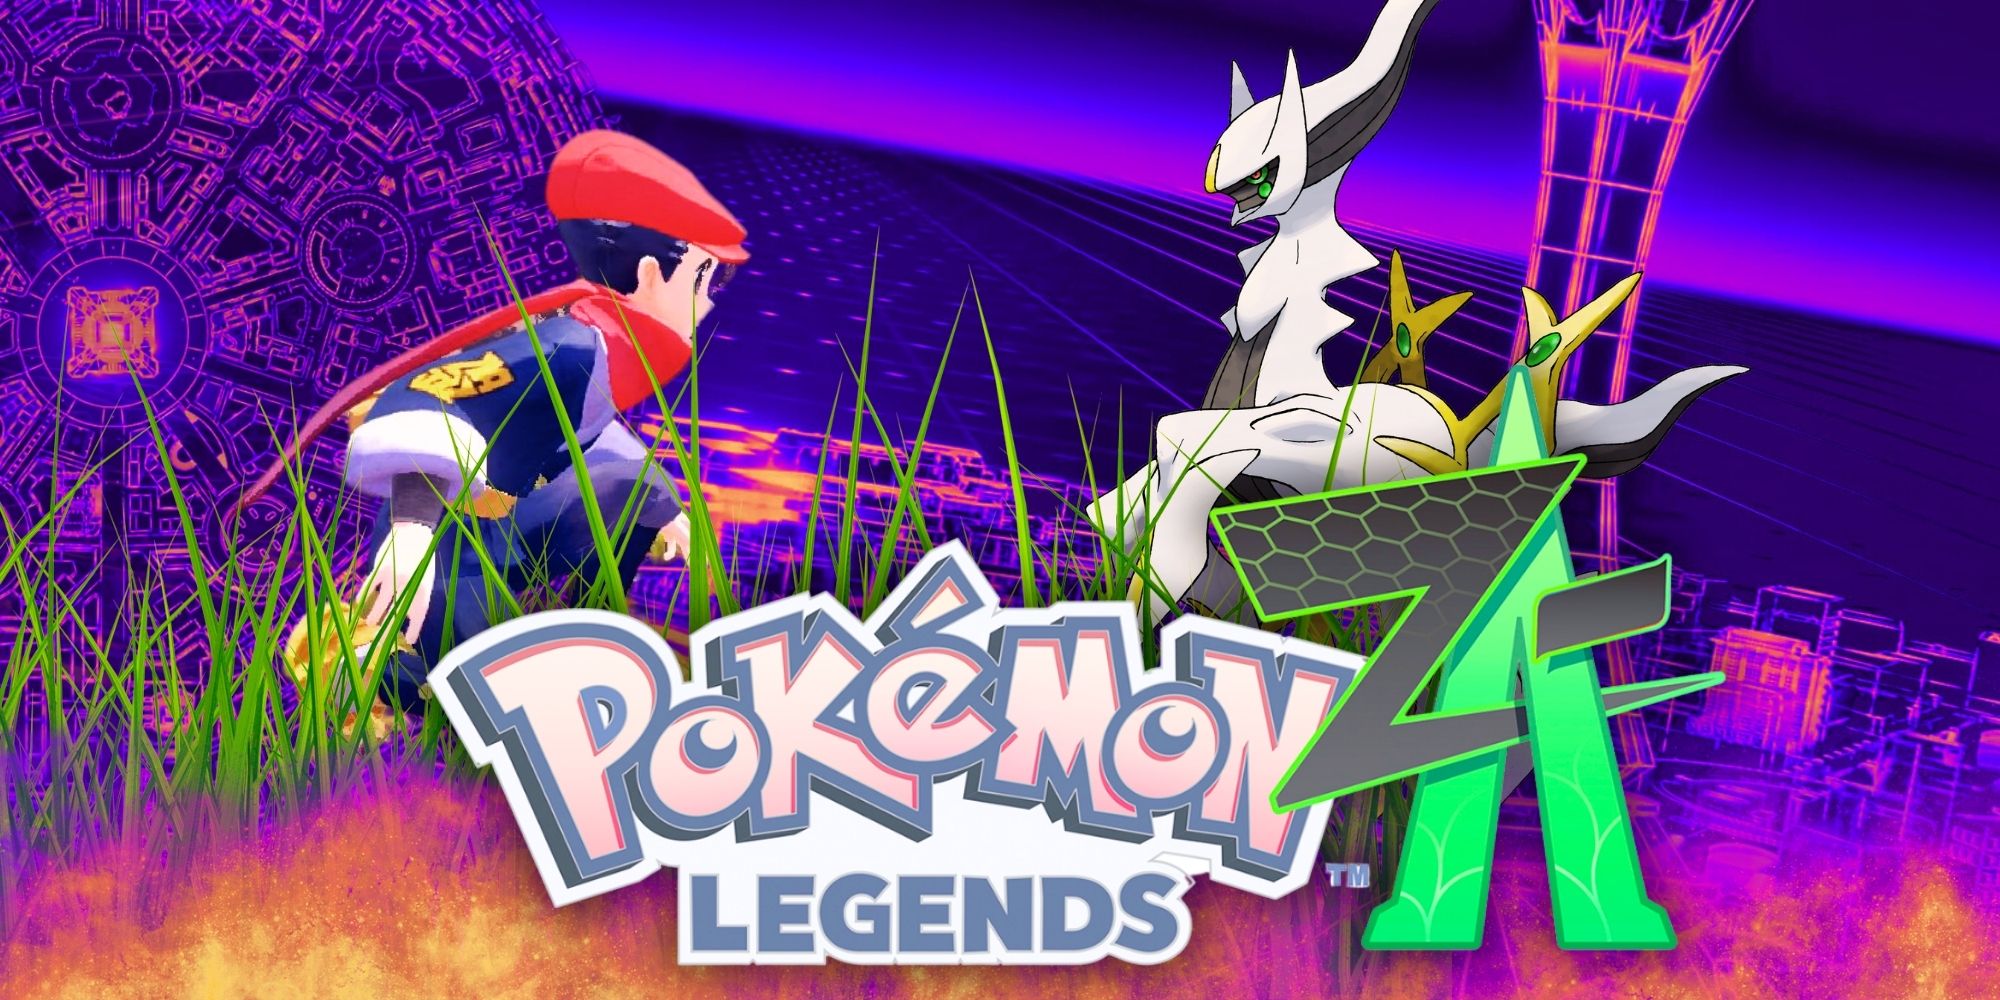 Pokémon Legends Z-A with the characters from Pokémon Legends Arceus behind